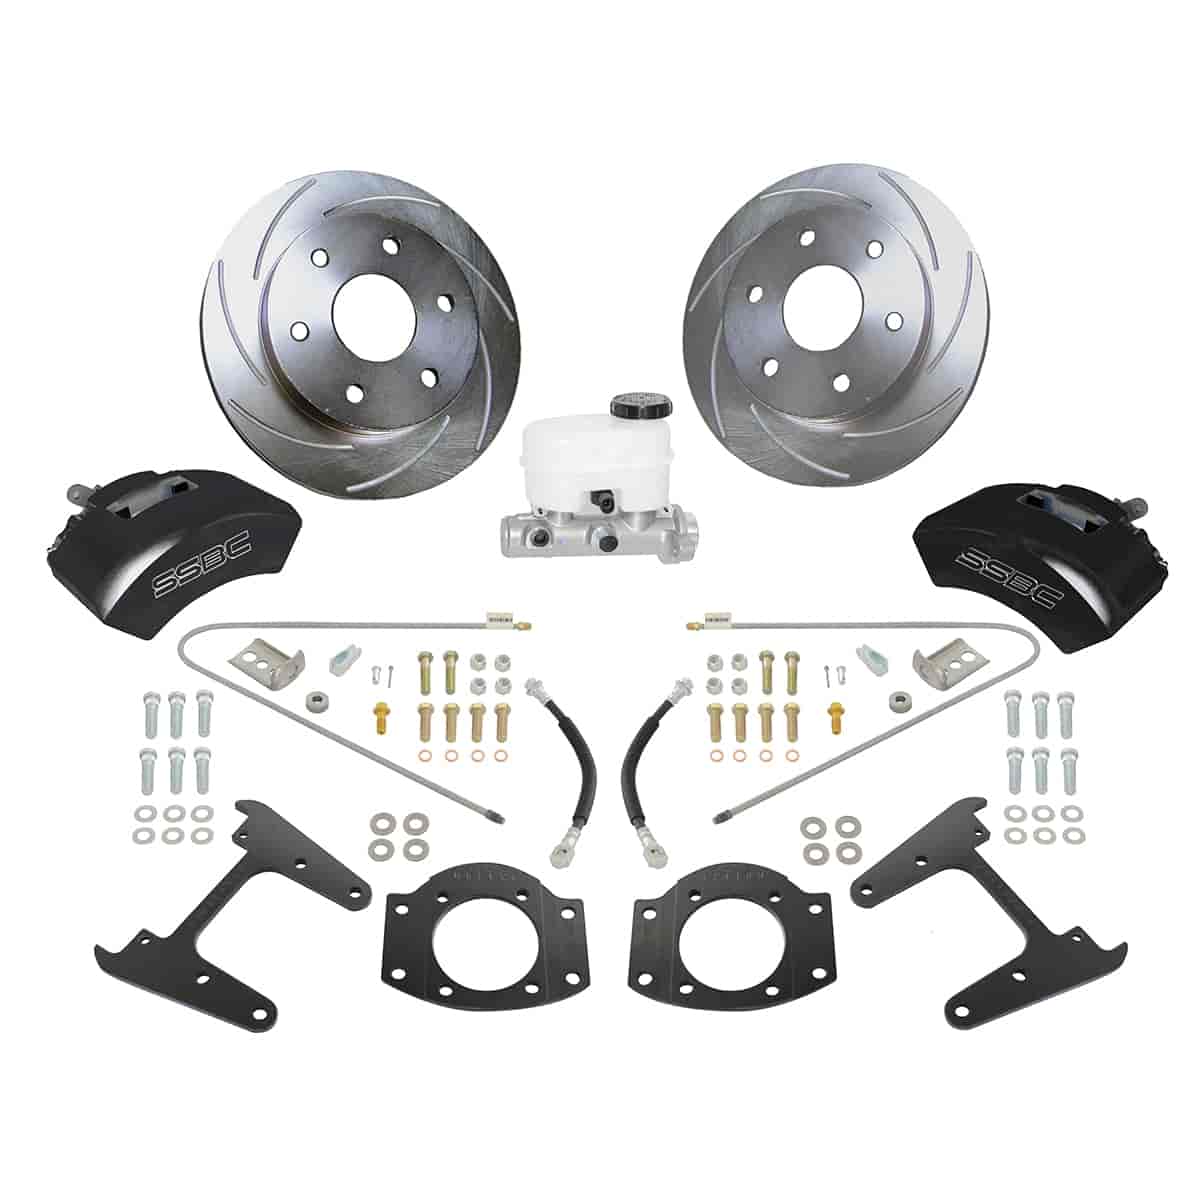 Super TKR1 Single-Piston Rear Drum to Disc Brake Conversion Kit 1988-00 GM (See applications in More Details)